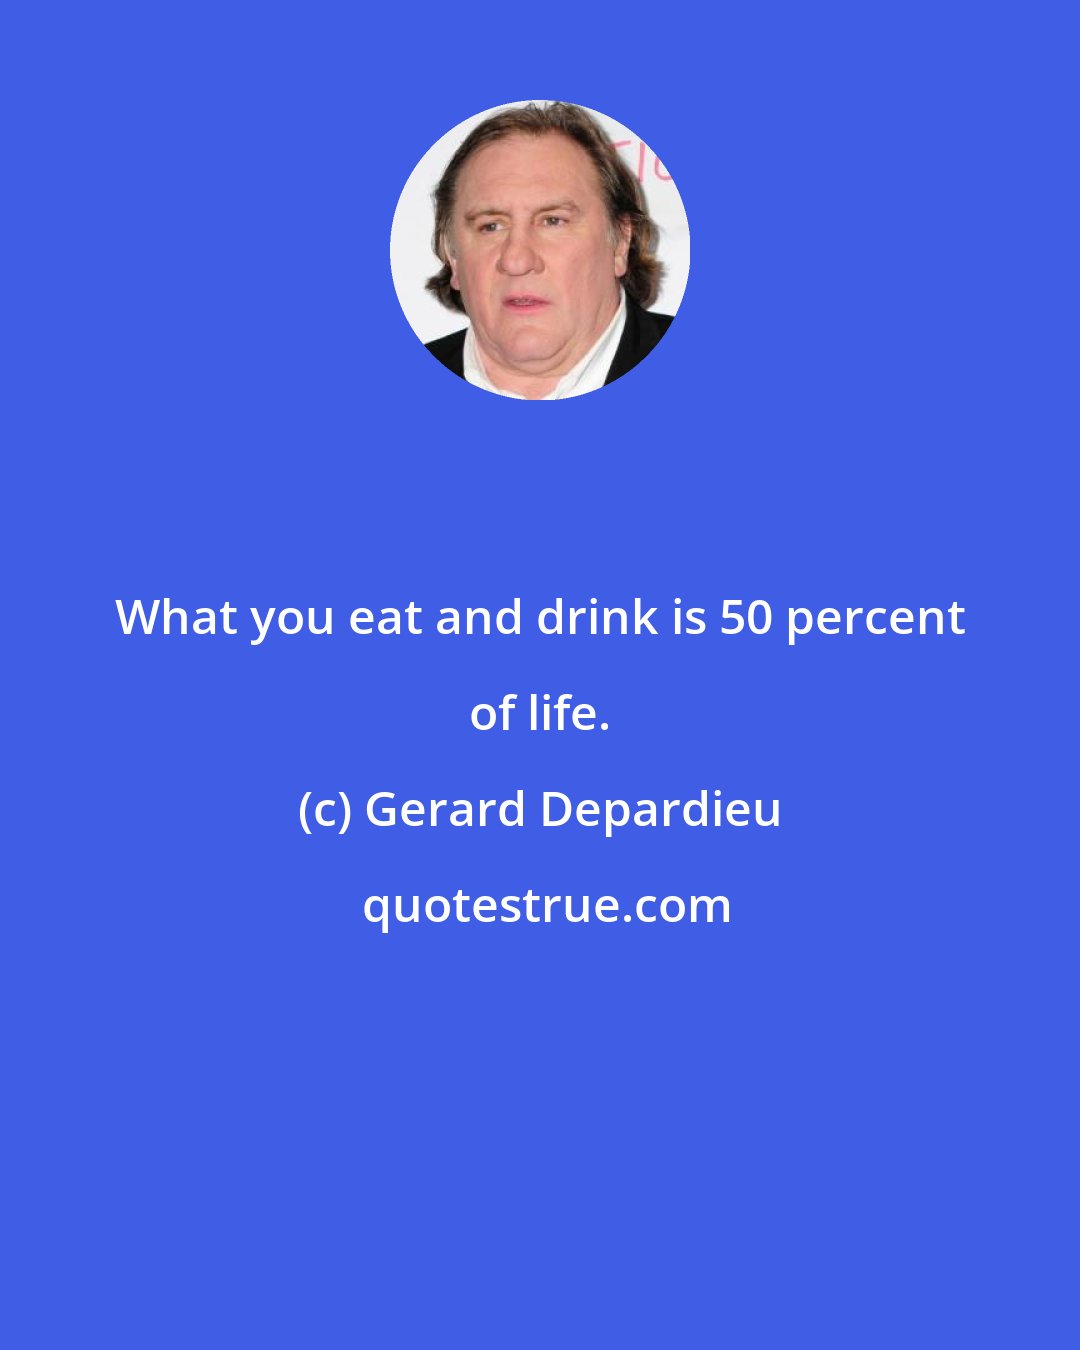 Gerard Depardieu: What you eat and drink is 50 percent of life.